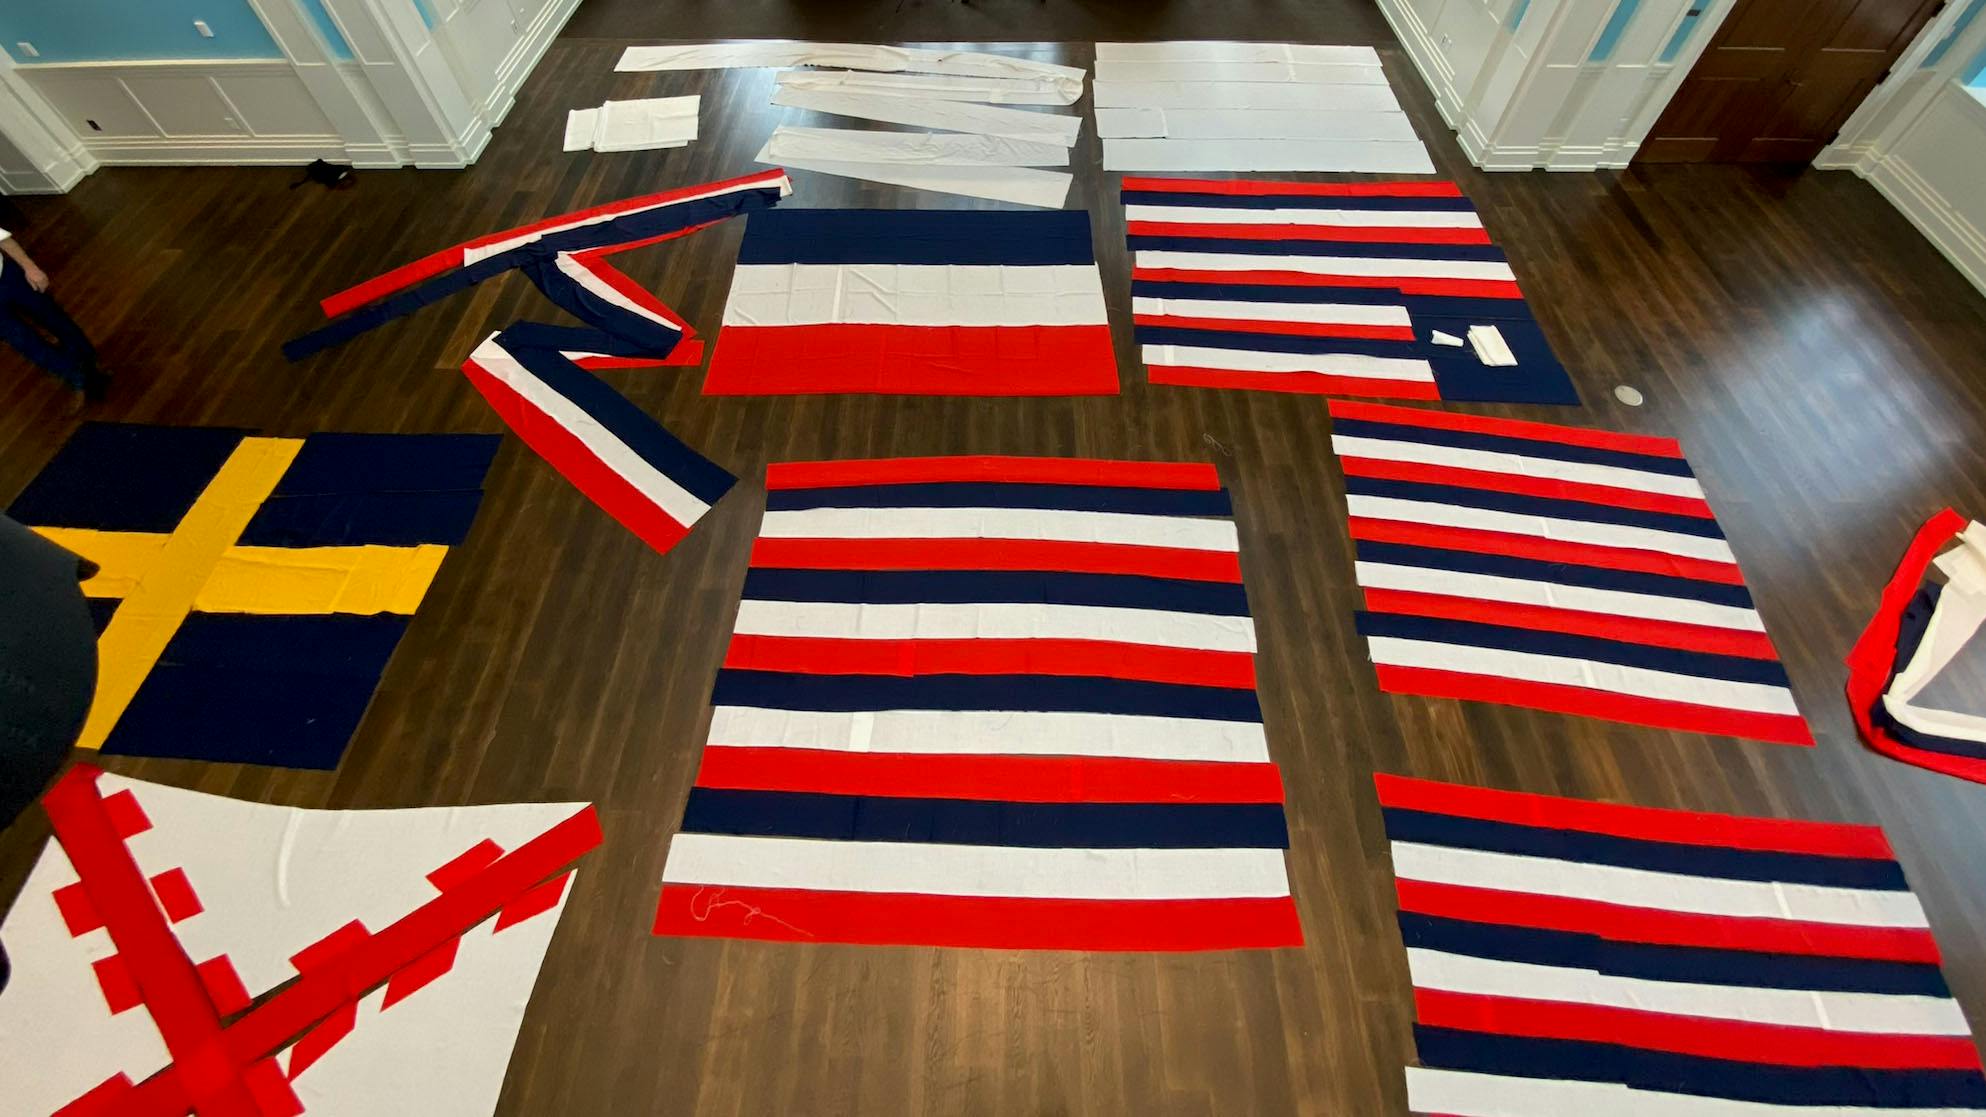 The Revolution Museum mounts an exhibition of historic American flags